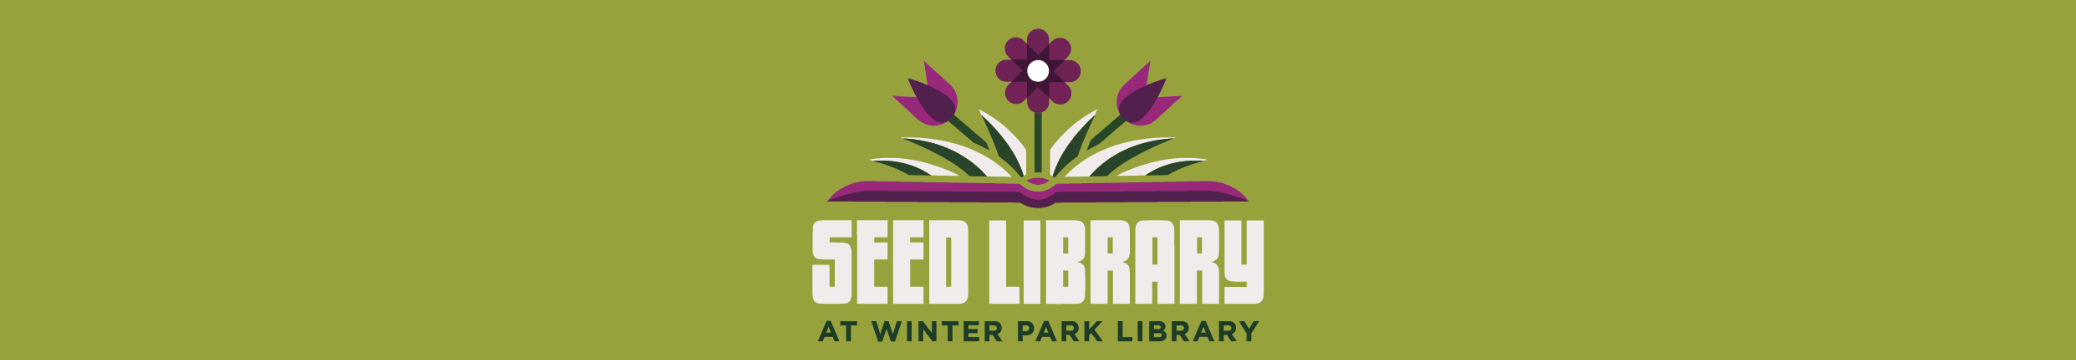 Seed Library at Winter Park Library 